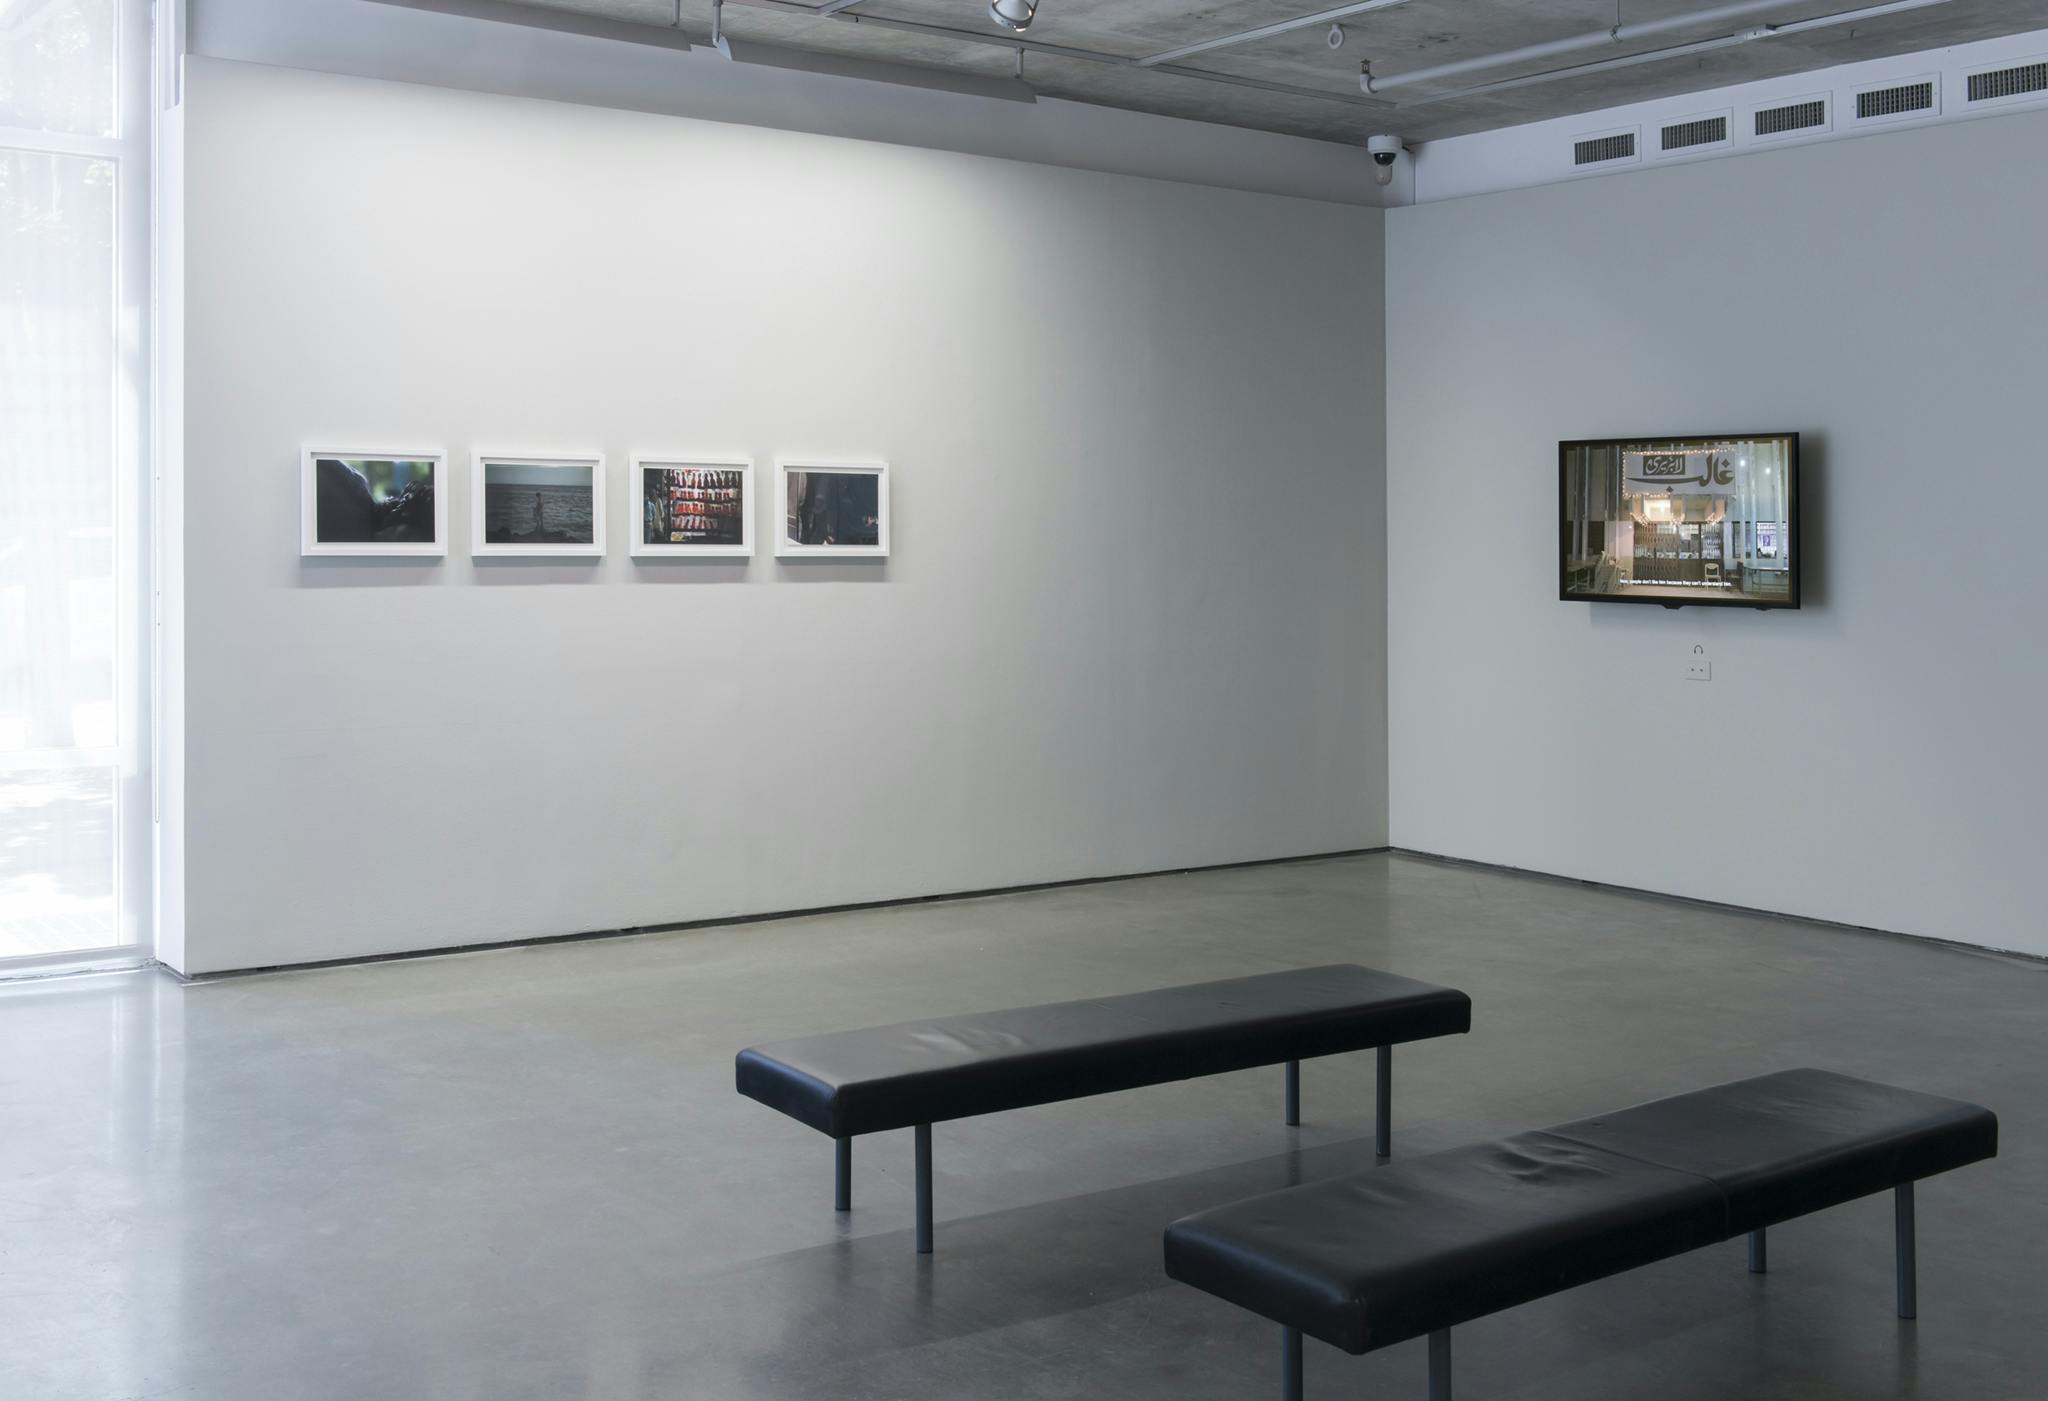 Four framed photographs and one monitor hang on two walls. On the left wall there are four framed photographs, on the right wall there is one monitor. Two benches sit in the middle of the room.